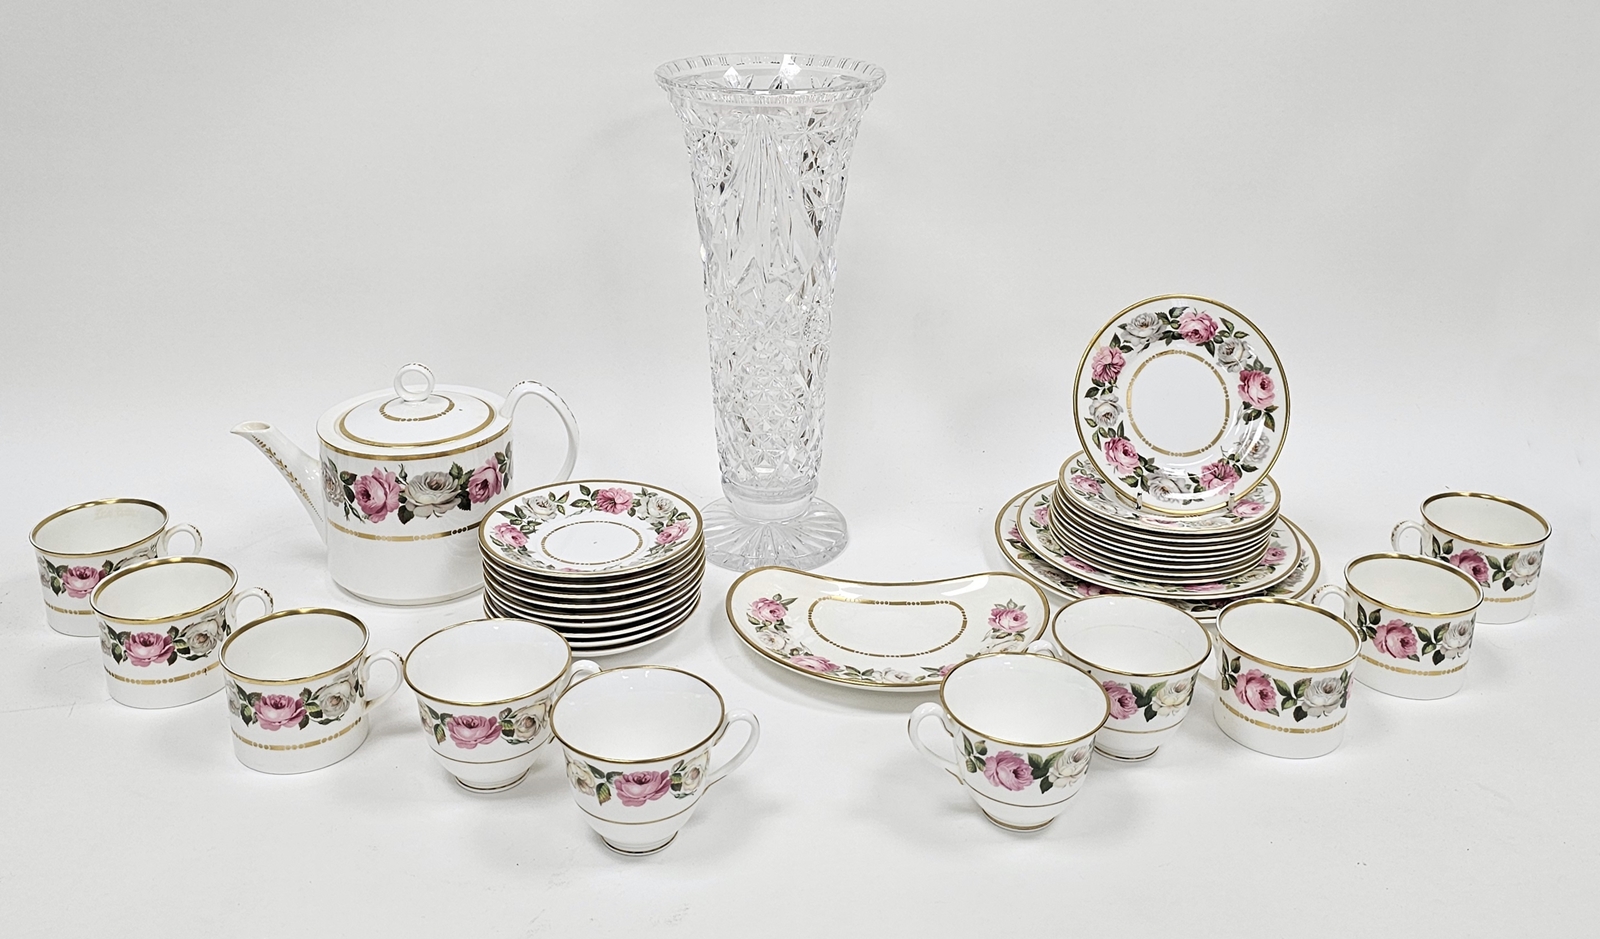 Composite Royal Worcester bone china 'Royal Garden' pattern part tea service, printed iron red - Image 4 of 6